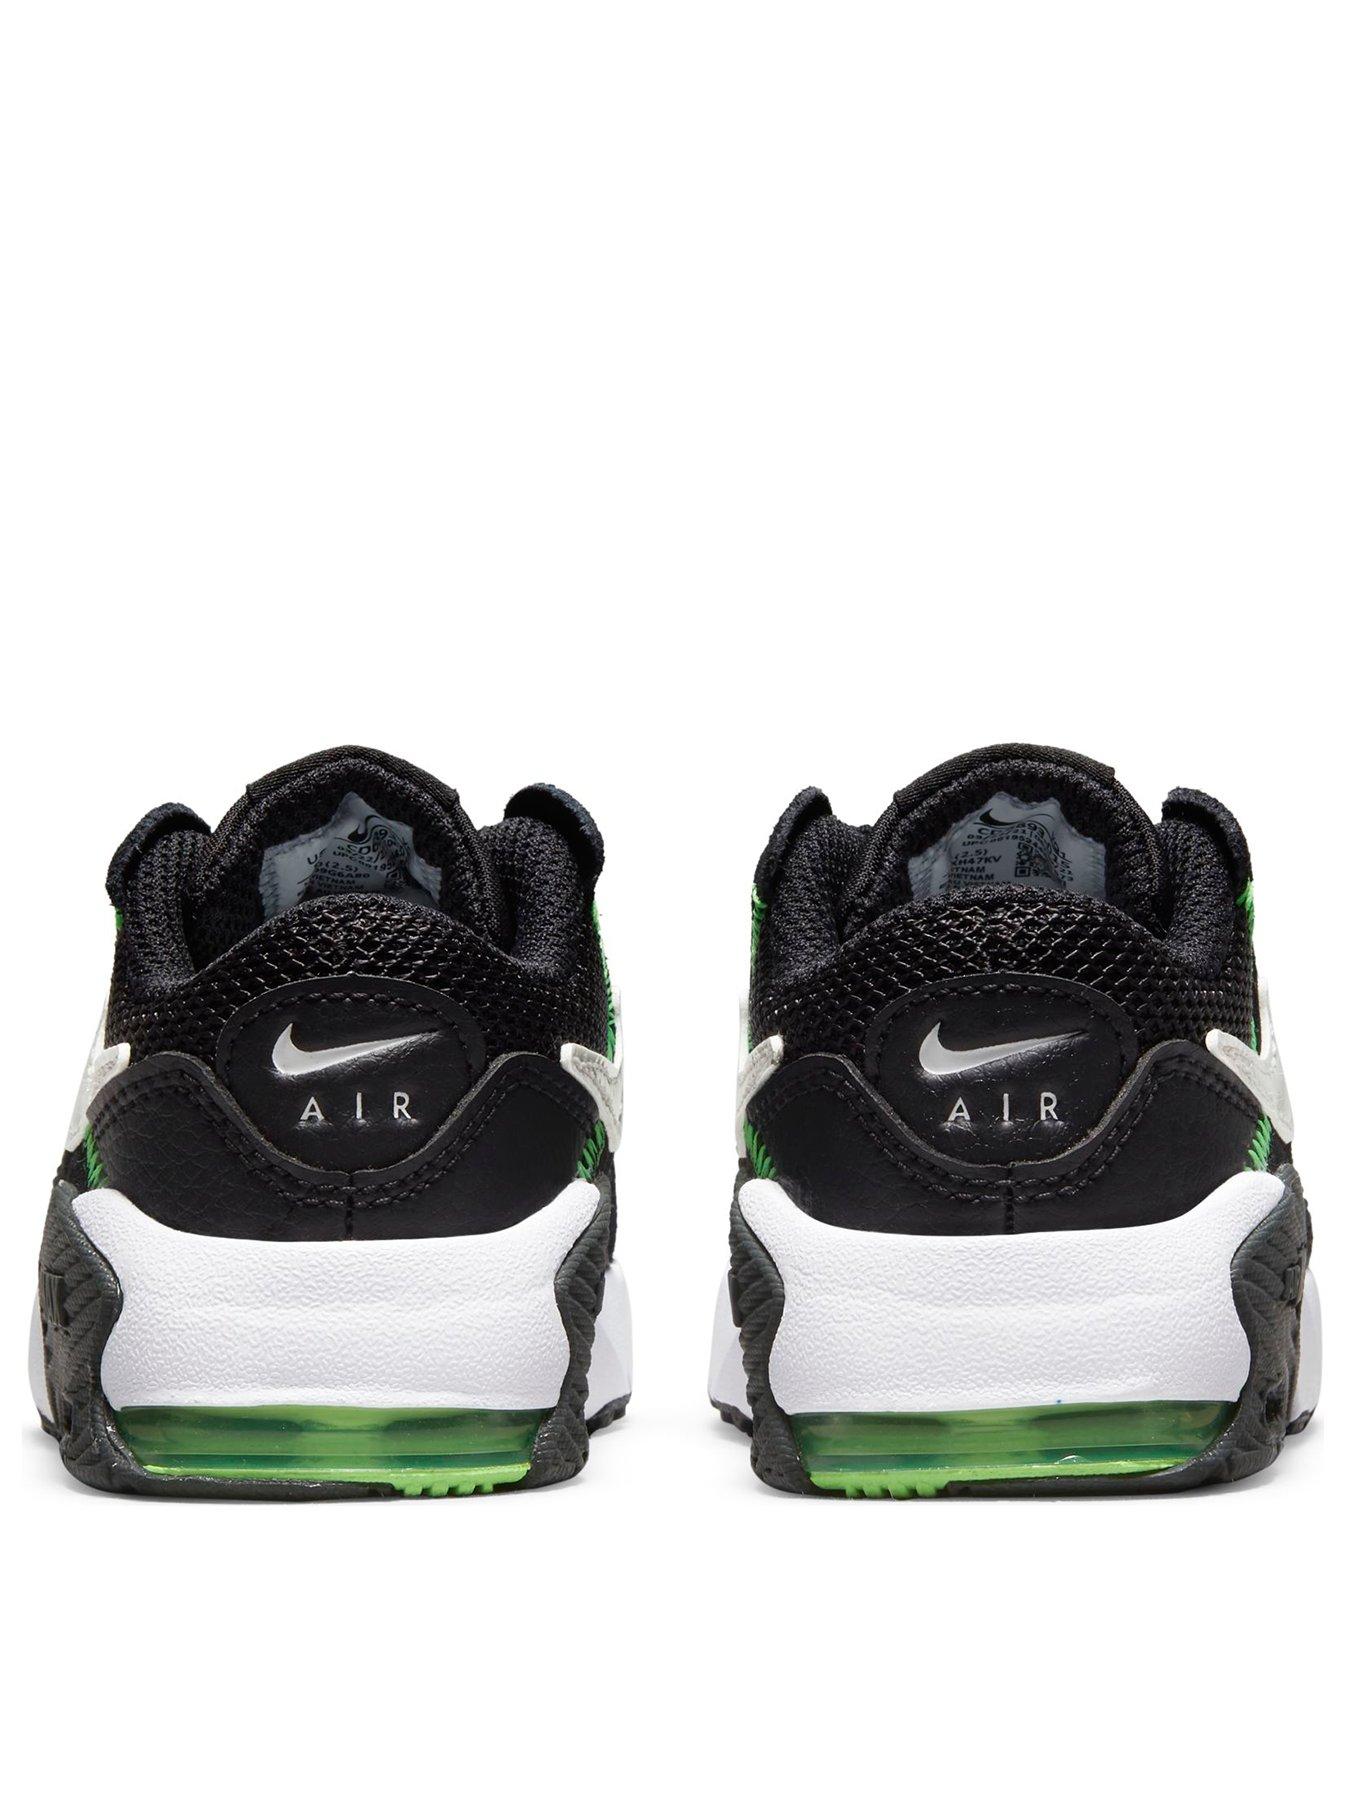 Trainers Air Max Excee Infant Trainer - Black/Multi